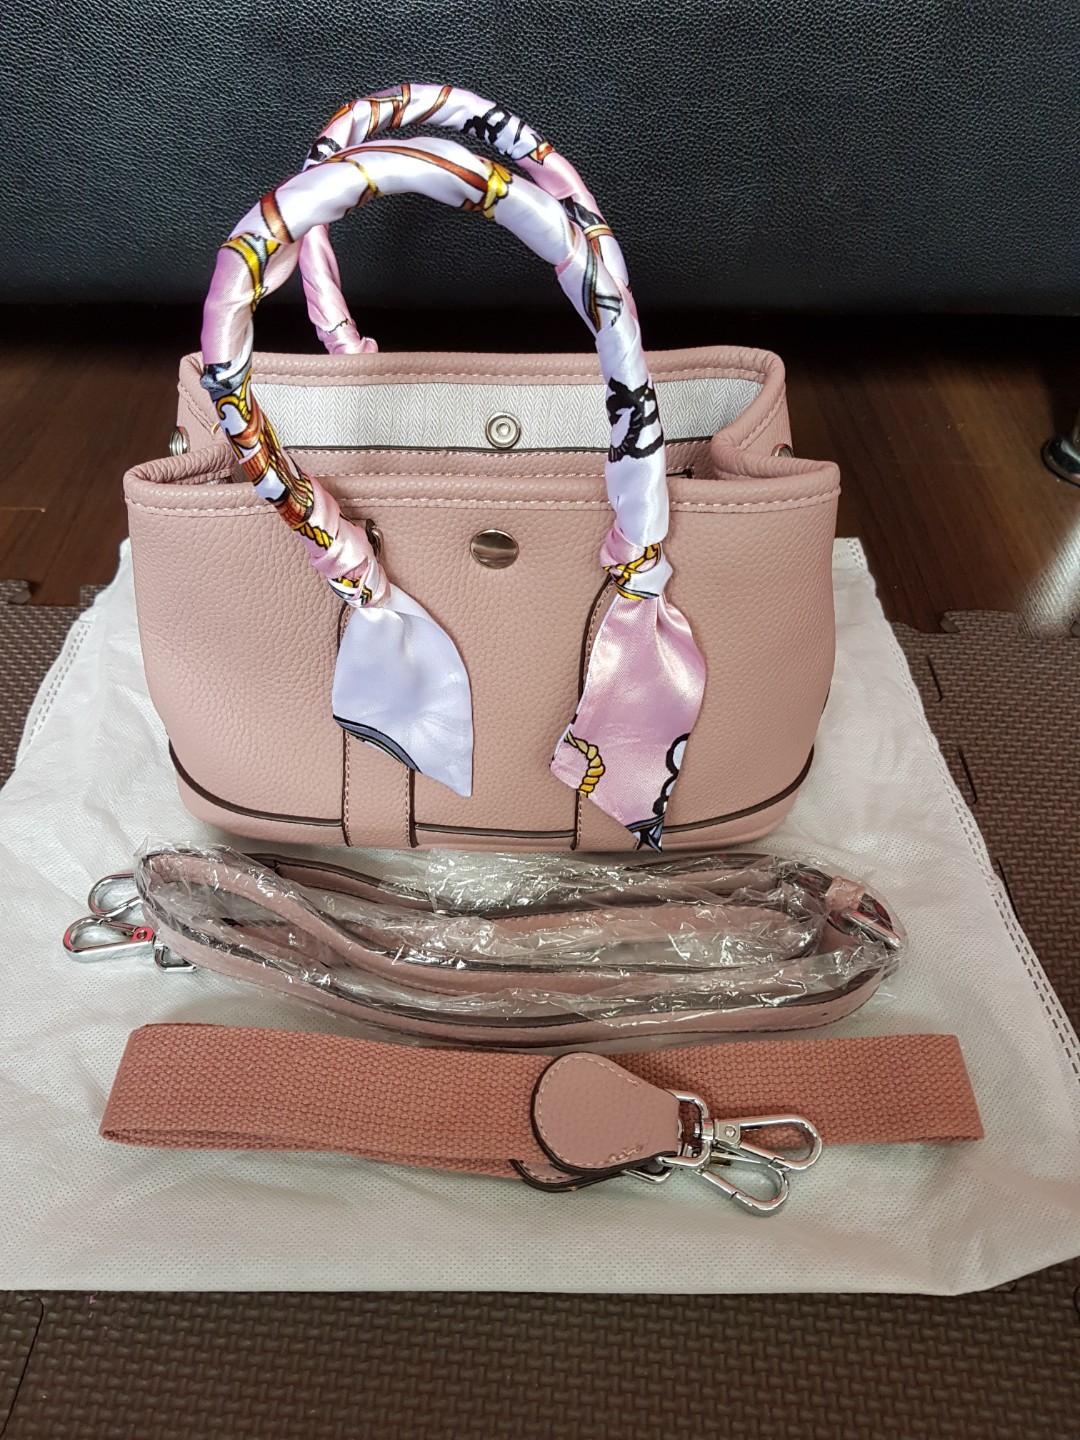 Garden Party Hermes bag with mini twilly